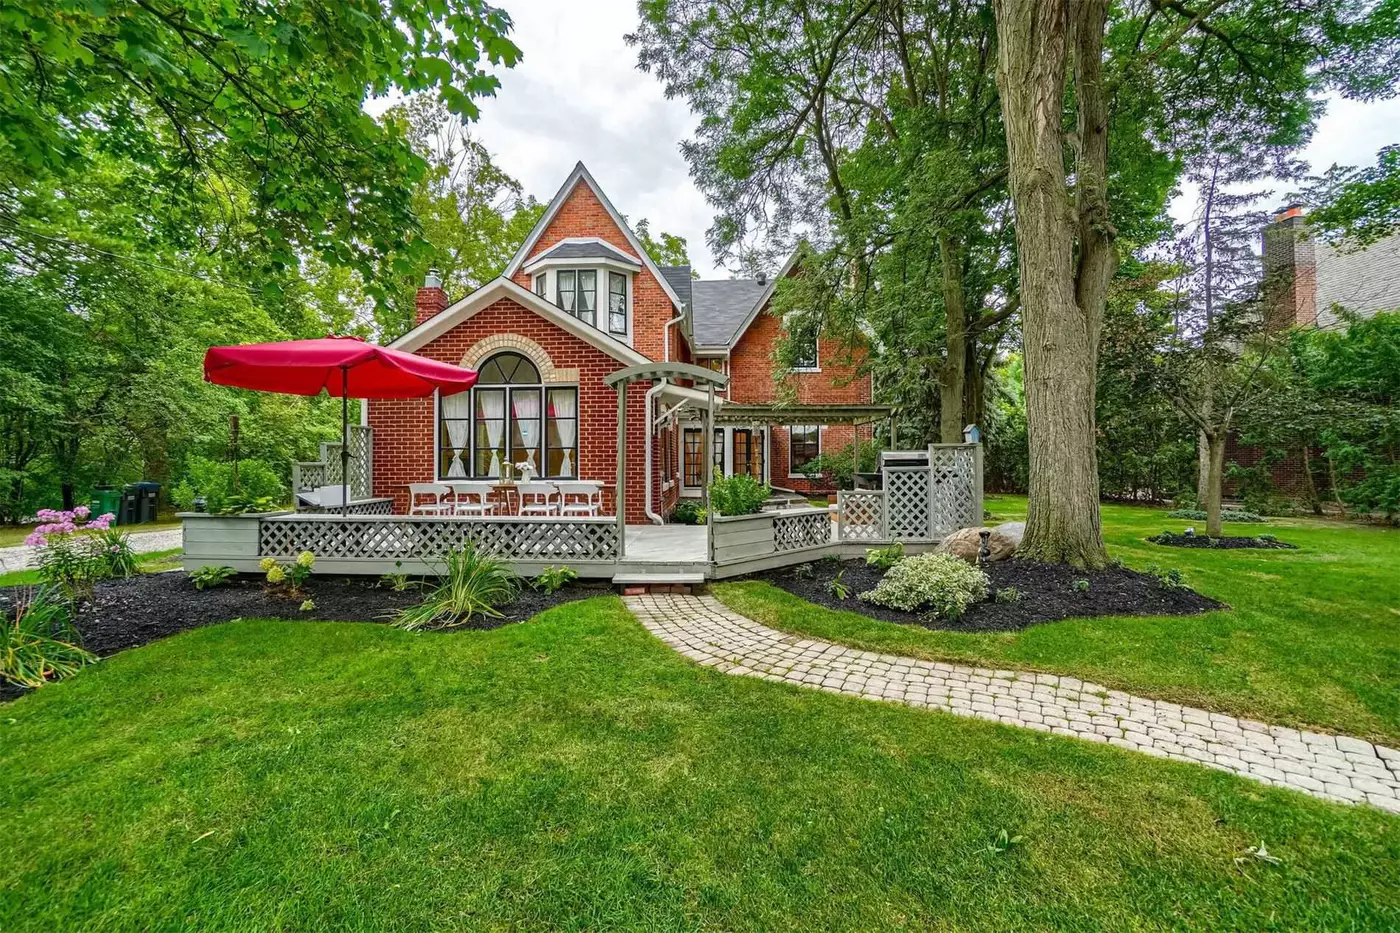 historic homes in brampton, Catherine nacar, buy historic homes in brampton, top real estate agent near me, sell your home with Catherine nacar, woman realtor